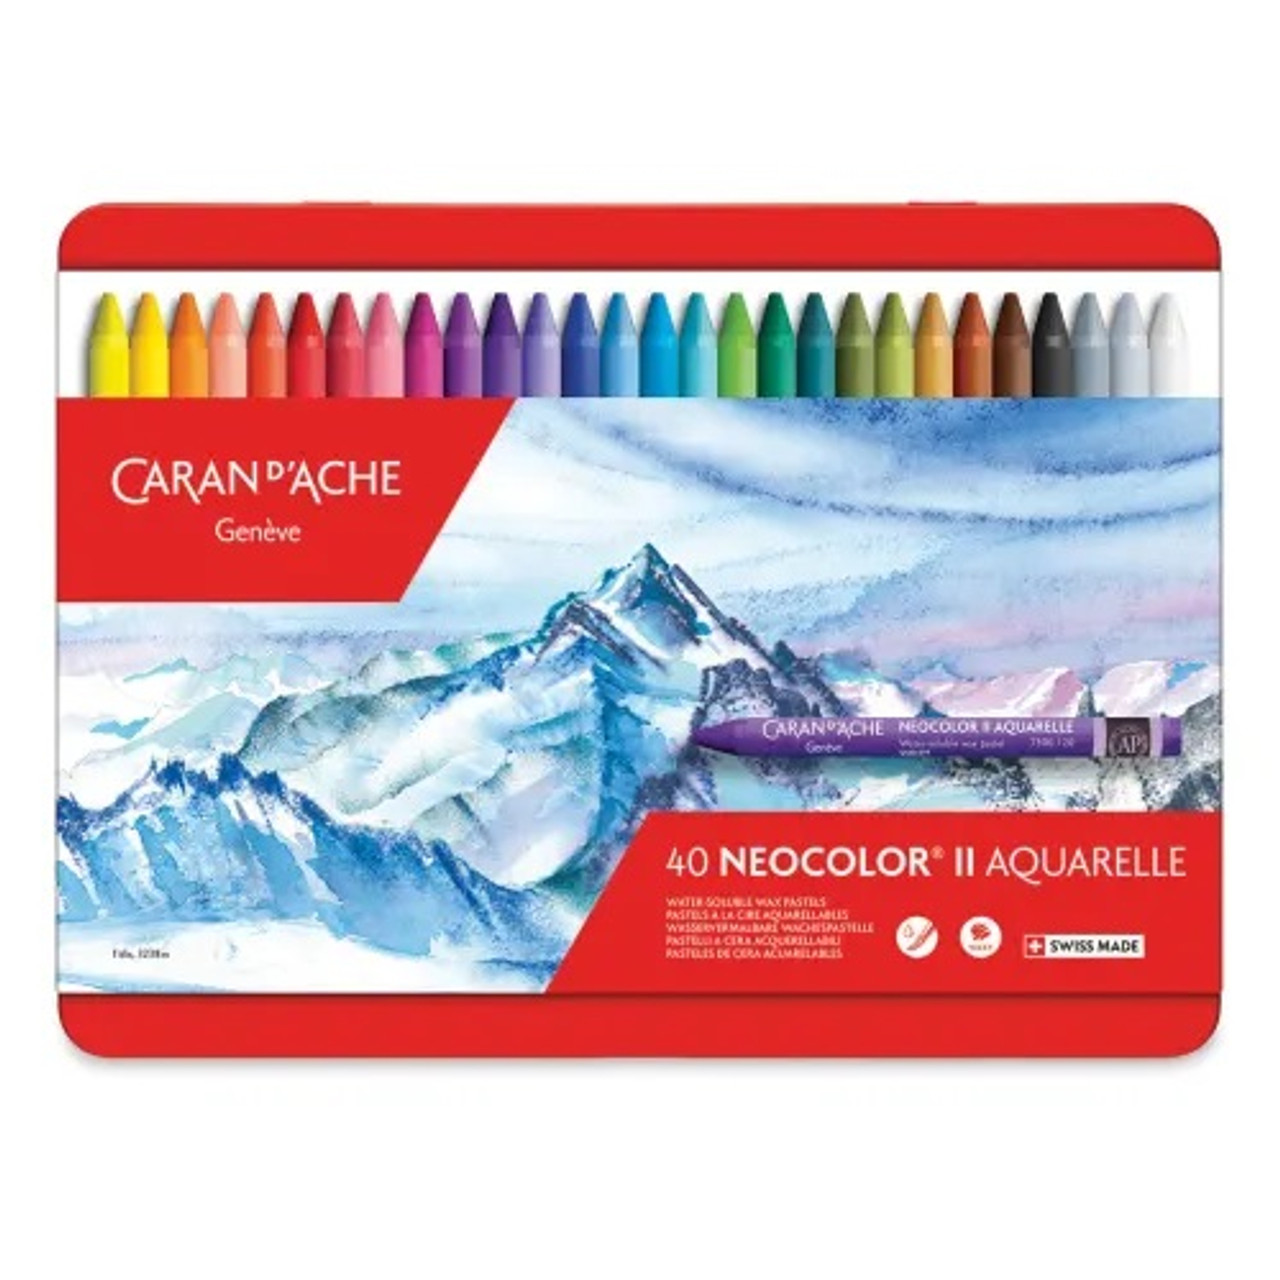 Neocolor II - Classic Neocolor II Water-Soluble Pastels, 40 Colors, by Caran d'Ache